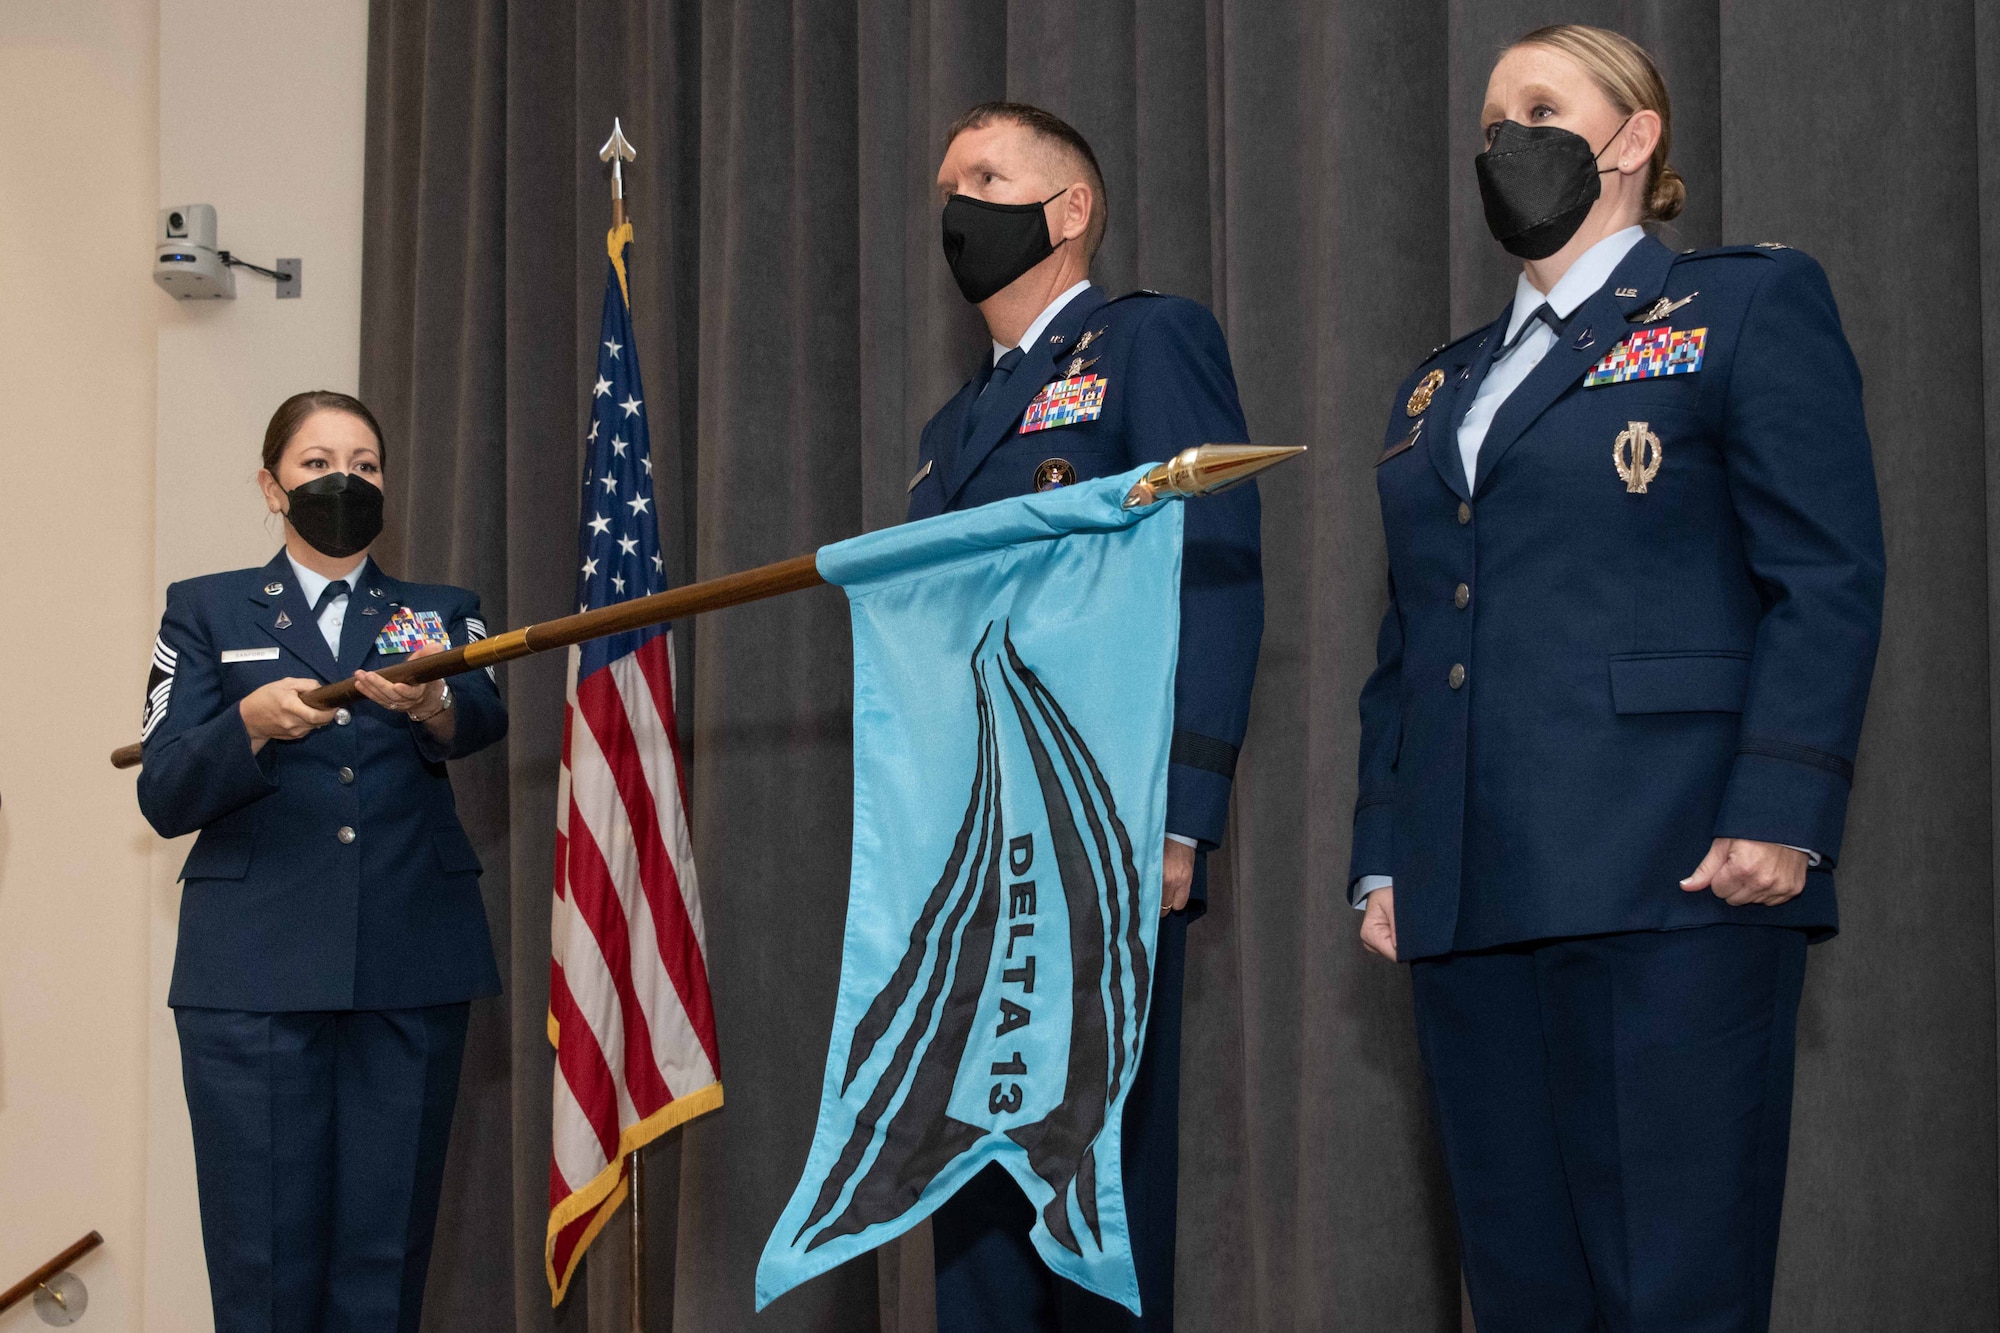 Brig. Gen. Shawn Bratton, Space Training and Readiness Command commander, and Col. Niki Lindhorst, Air University space chair, stand at attention as Chief Master Sgt. Esther Sanford unfurls the Space Delta 13 flag during the unit’s activation ceremony at Officer Training School, Sep. 13, 2021.